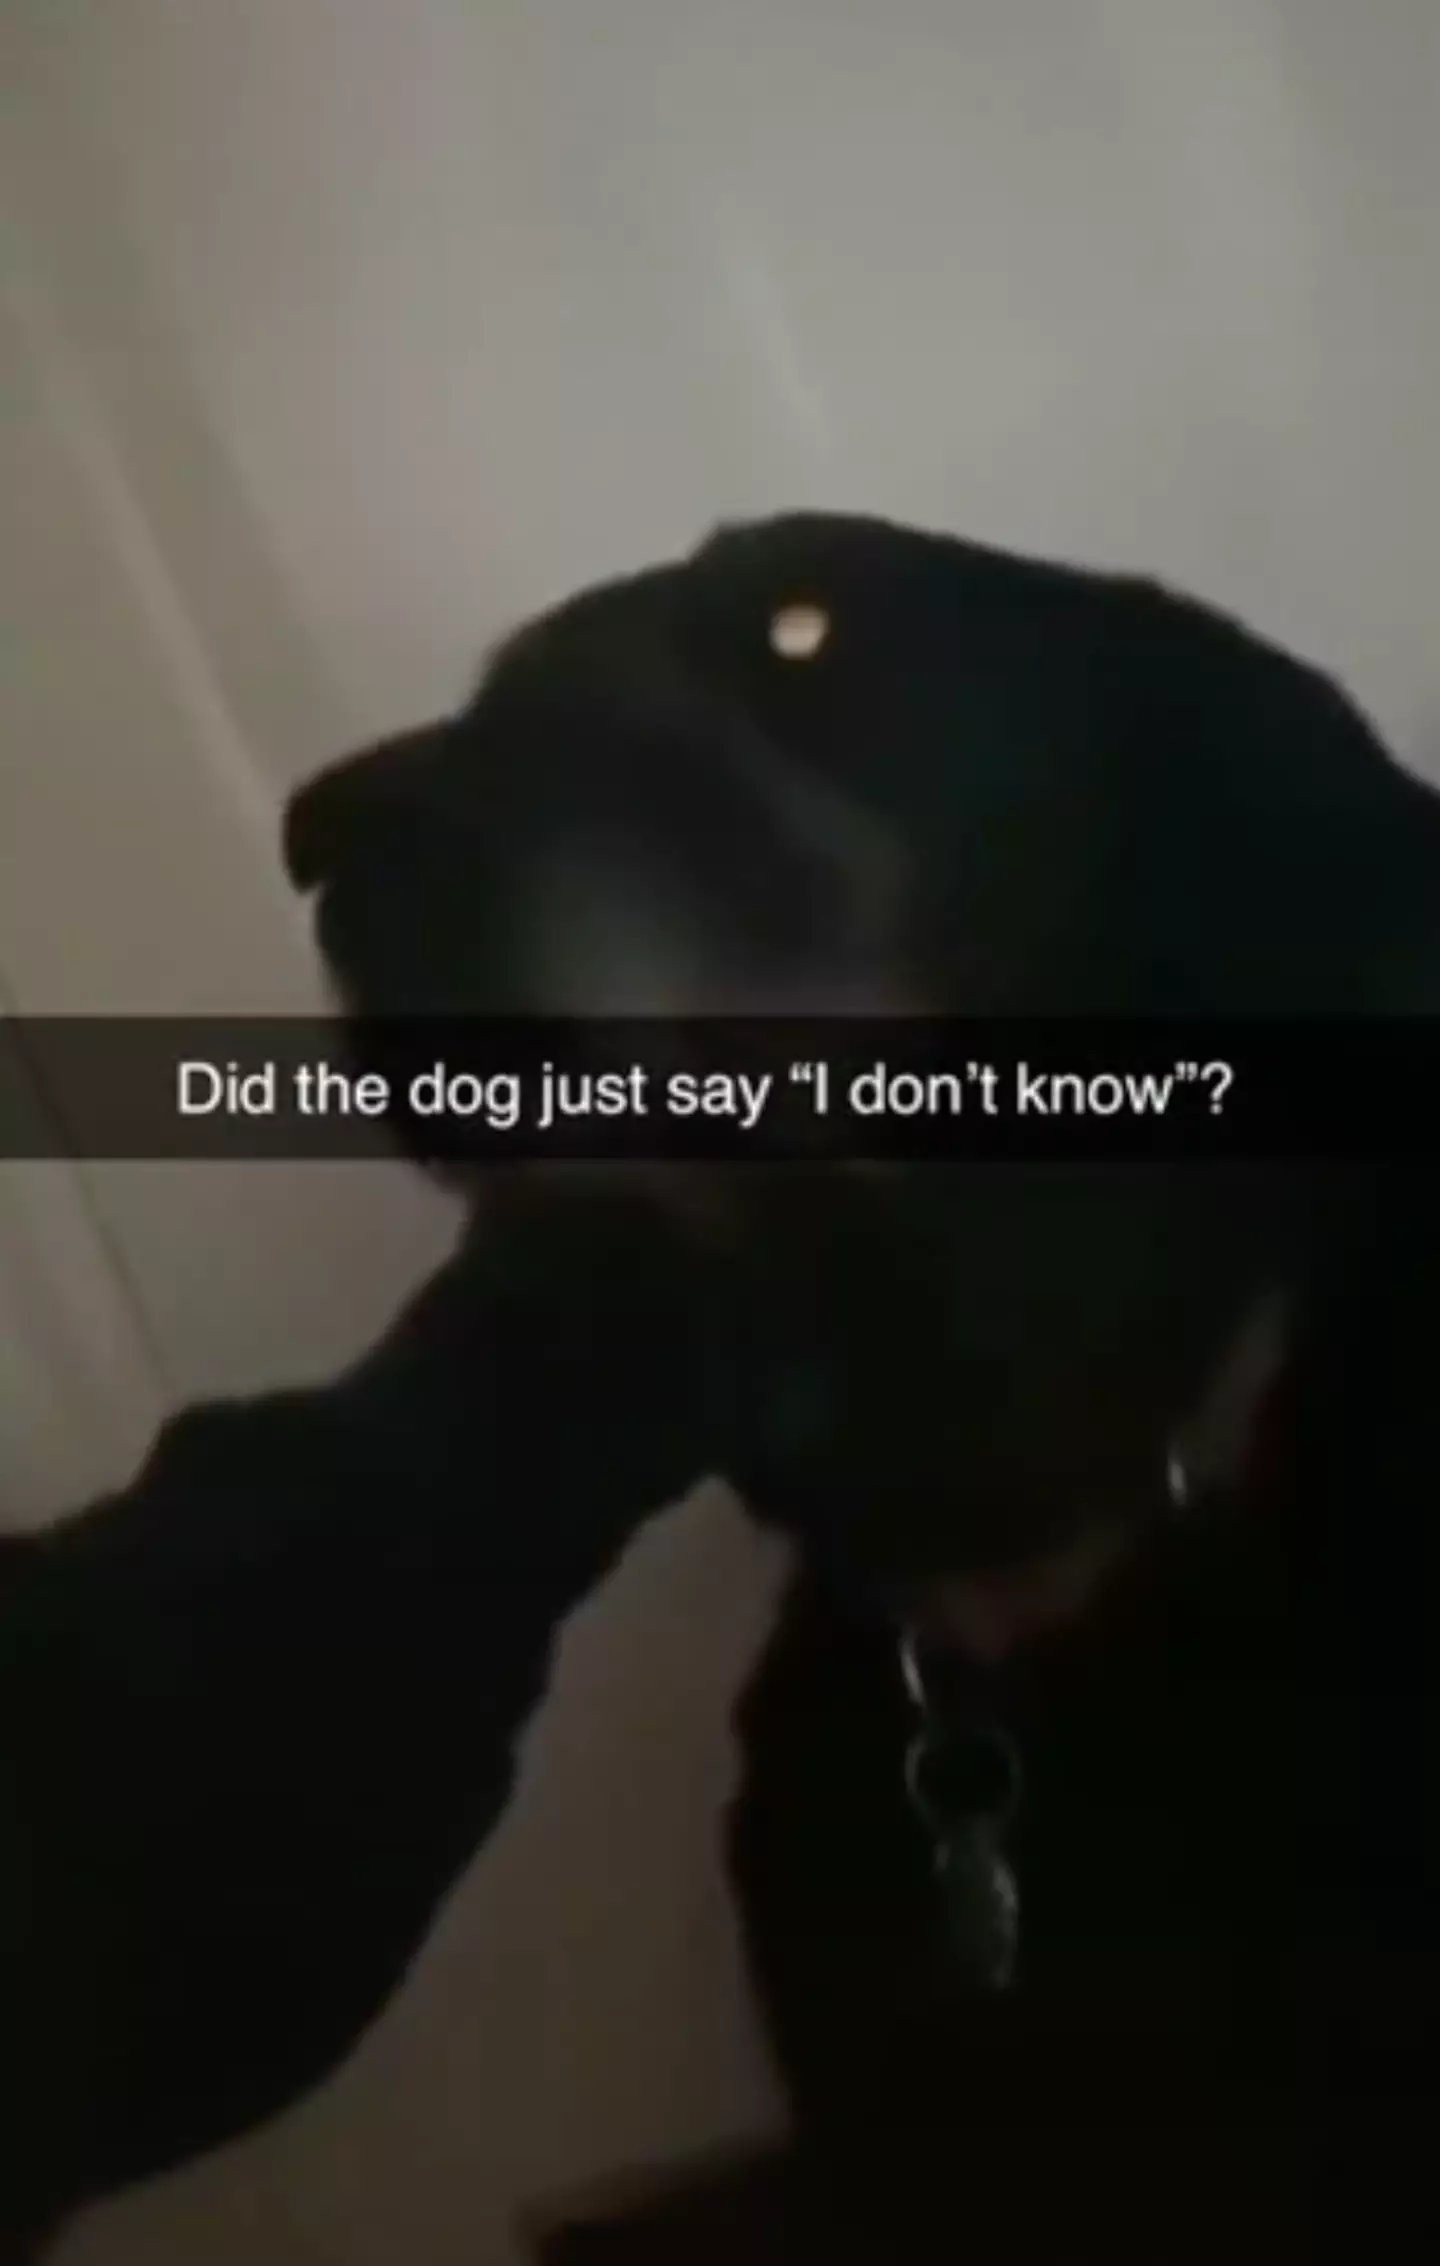 Viewers were shocked when the dog came out with a full sentence. (